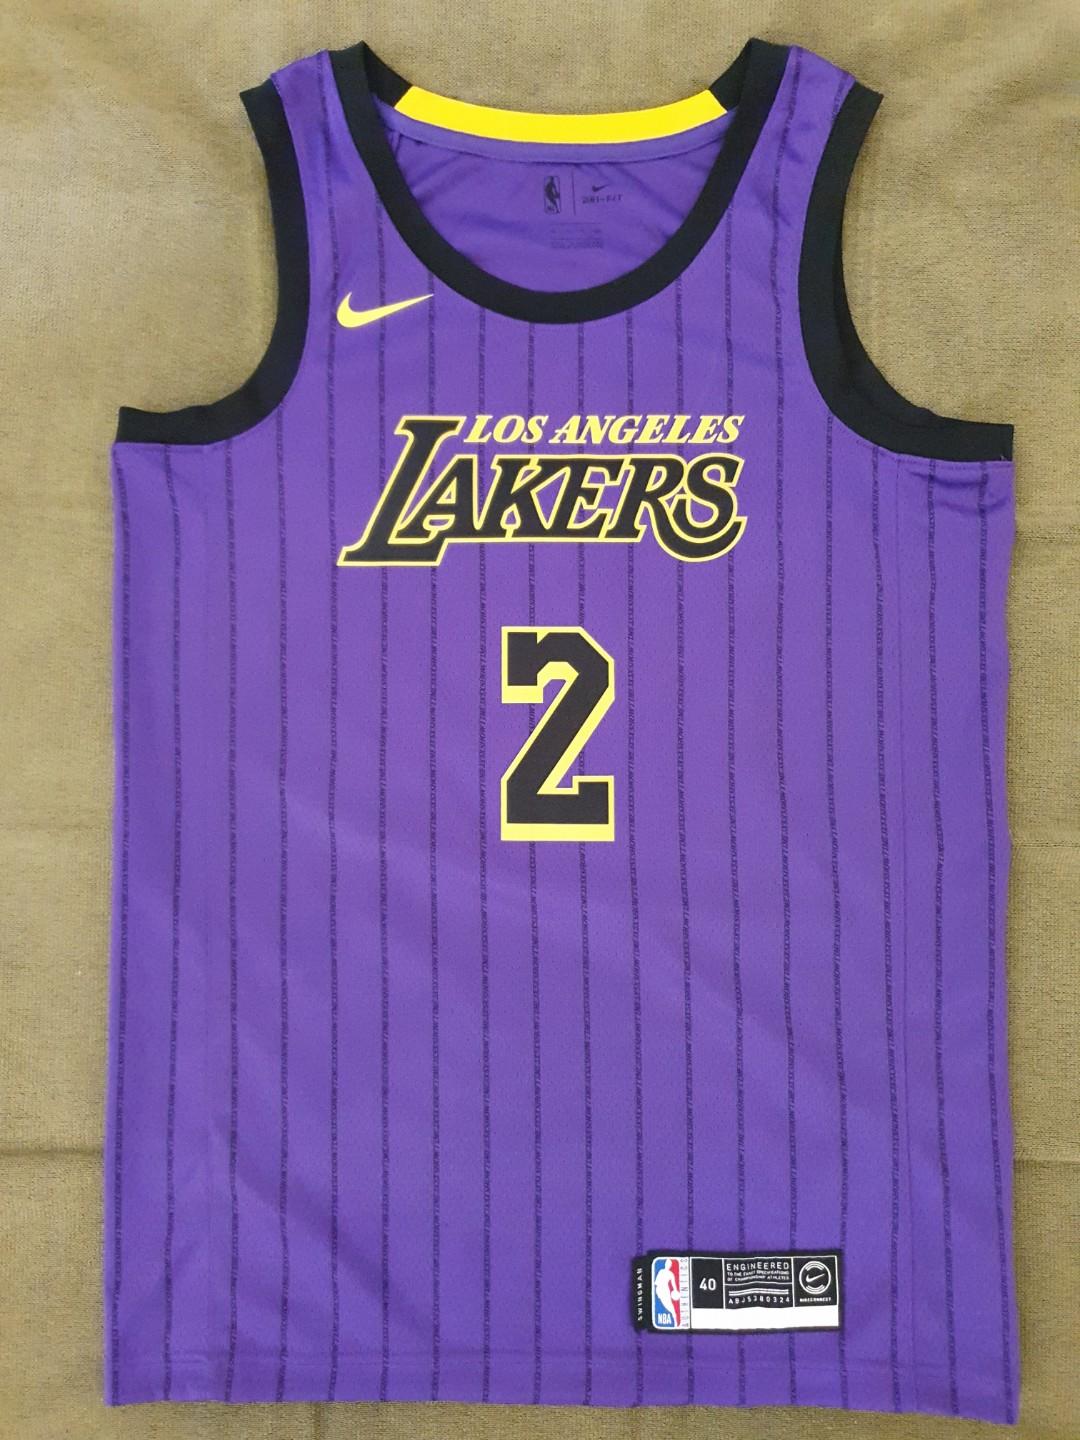 Nike NBA Los Angeles Lakers Lonzo Ball #2 Jersey Size Youth S (8).